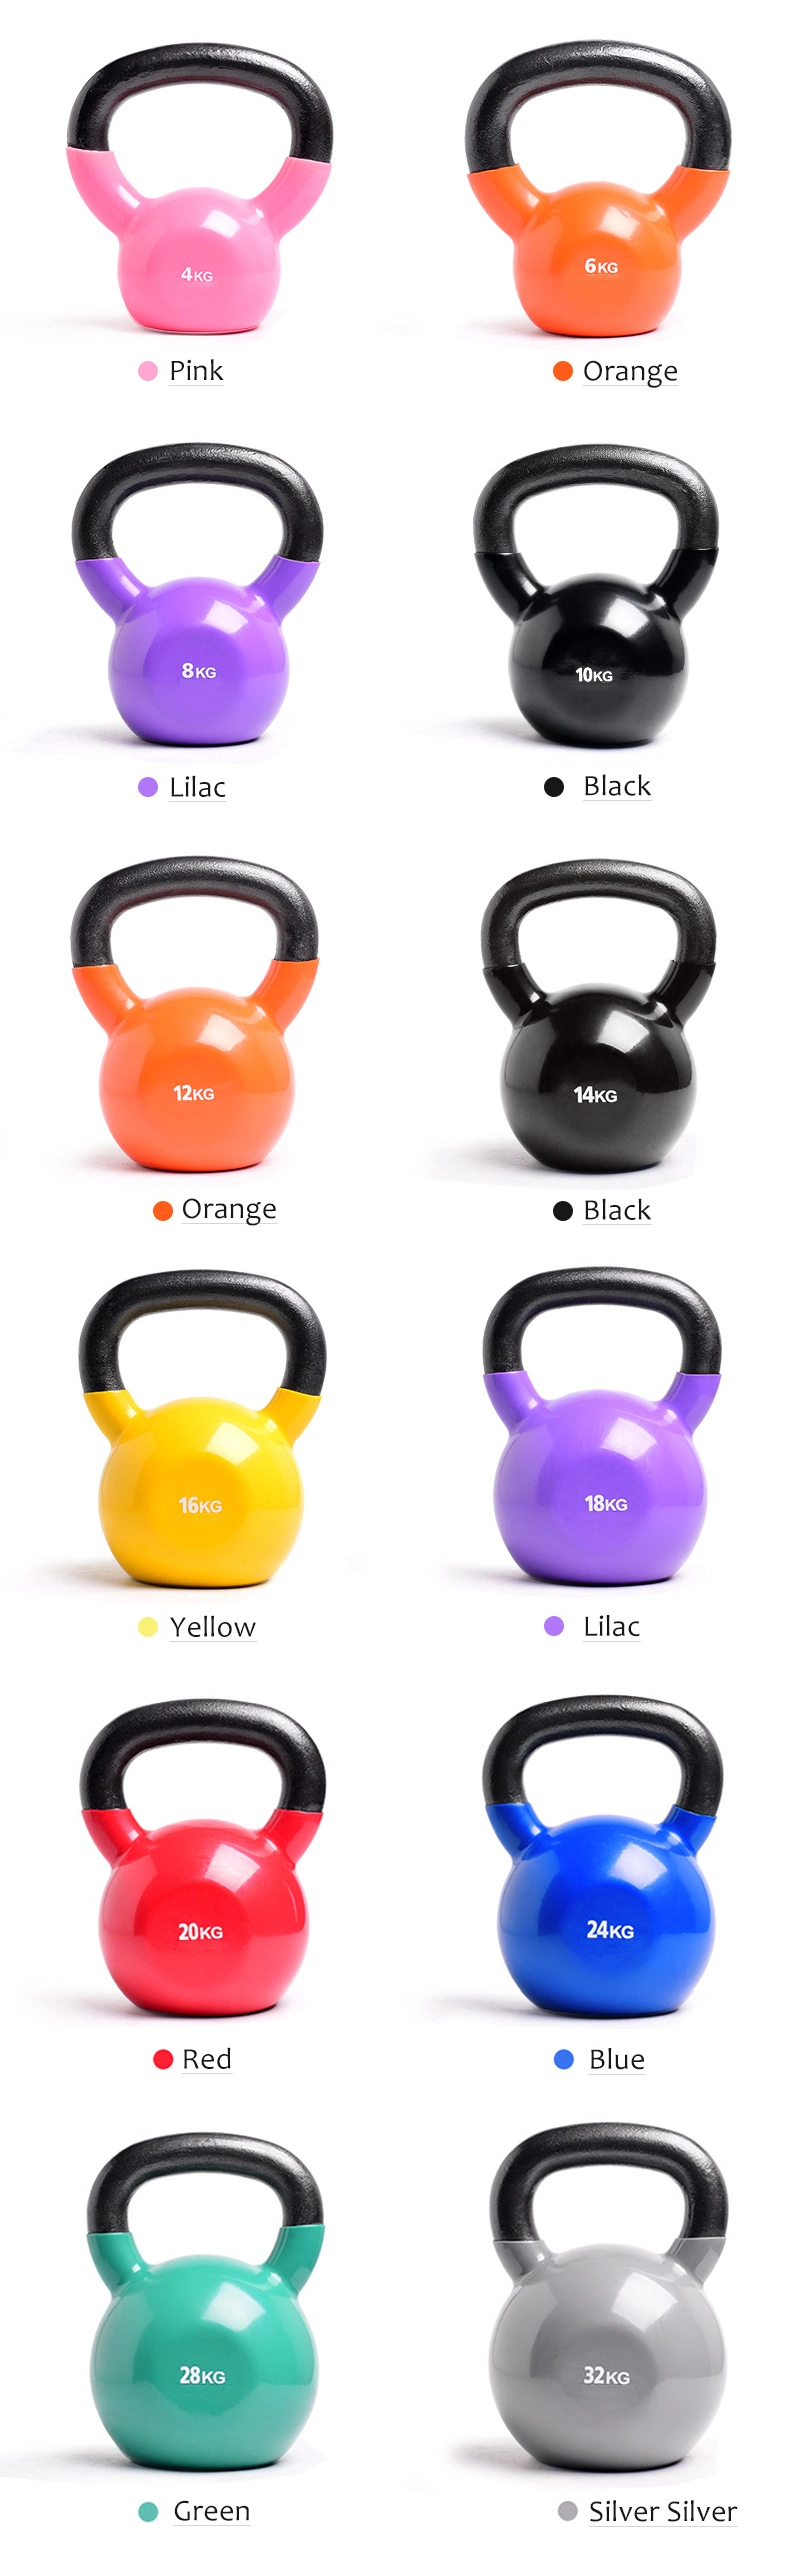 Custom Home Cardio Workout Gym ABS Exercises Weights Handle Kettle Bells in Kg